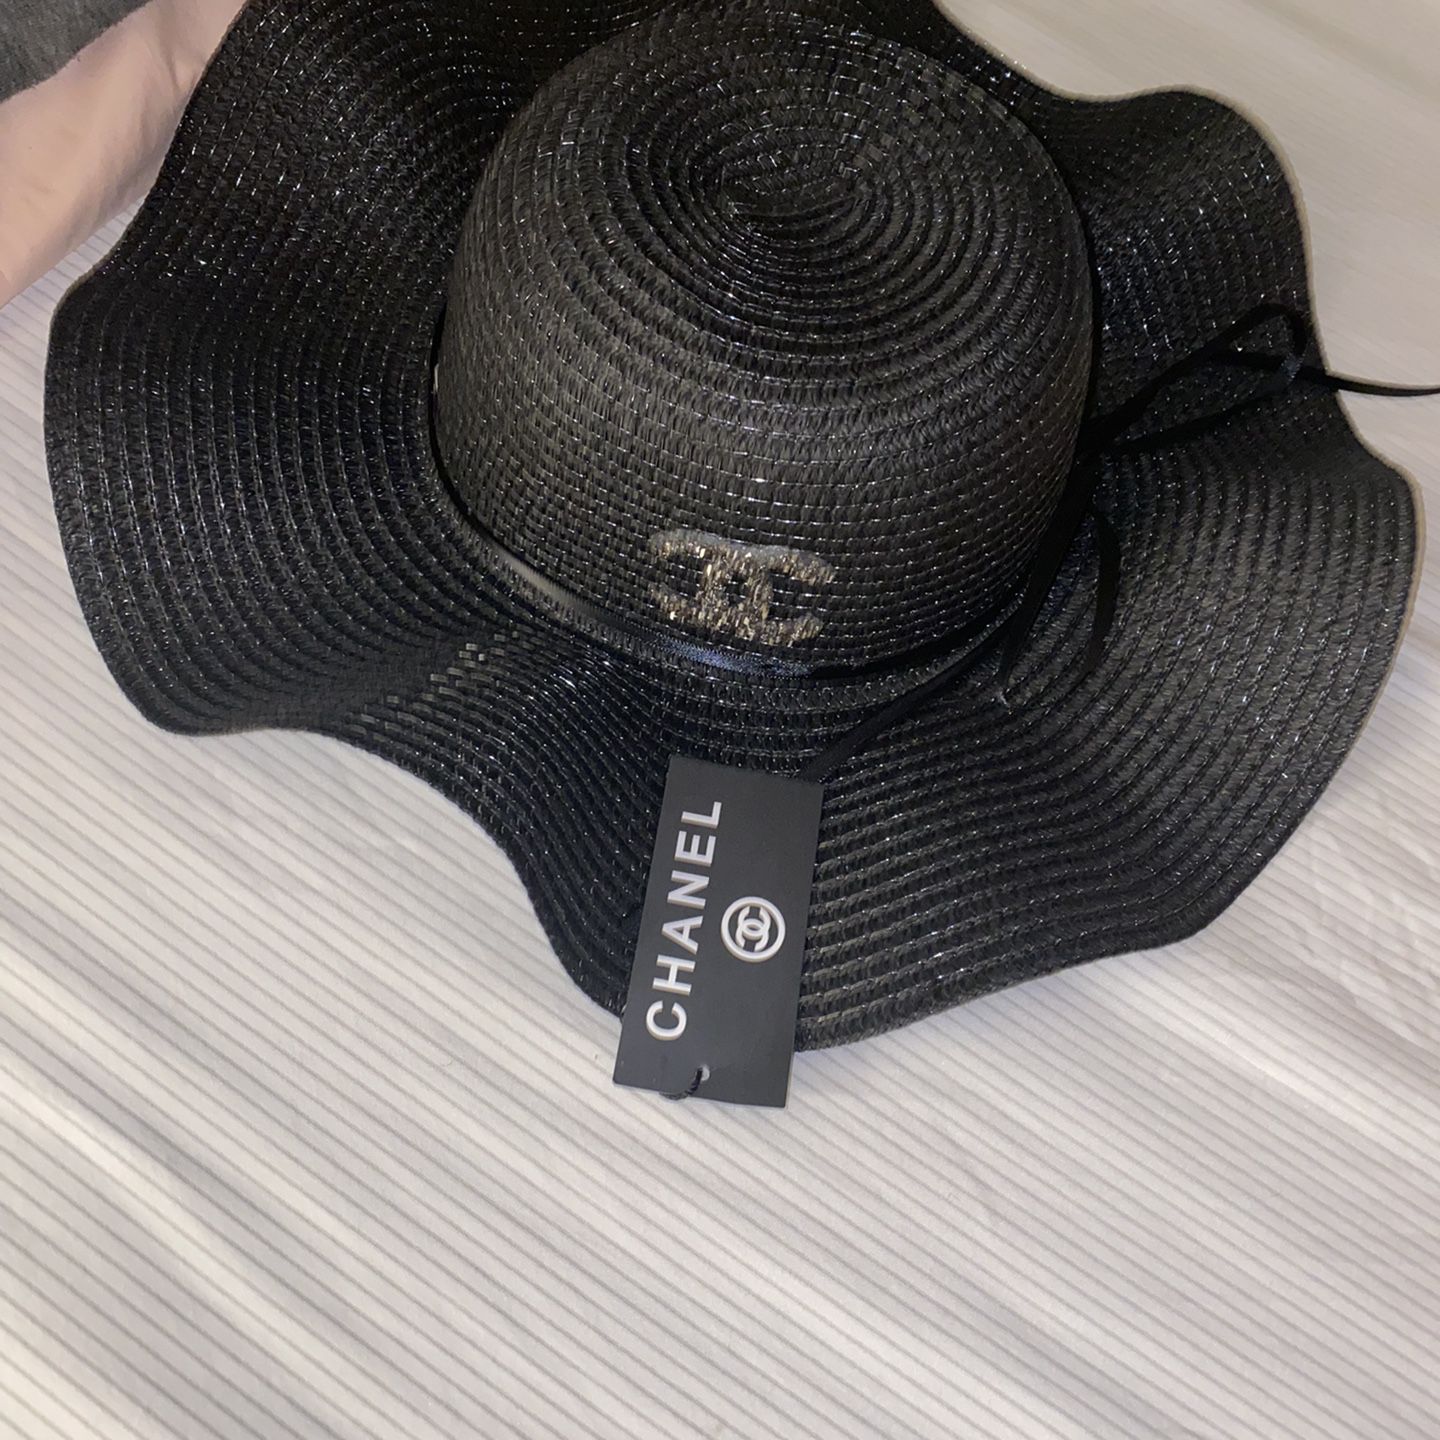 Gucci Bucket Hat for Sale in San Mateo, CA - OfferUp